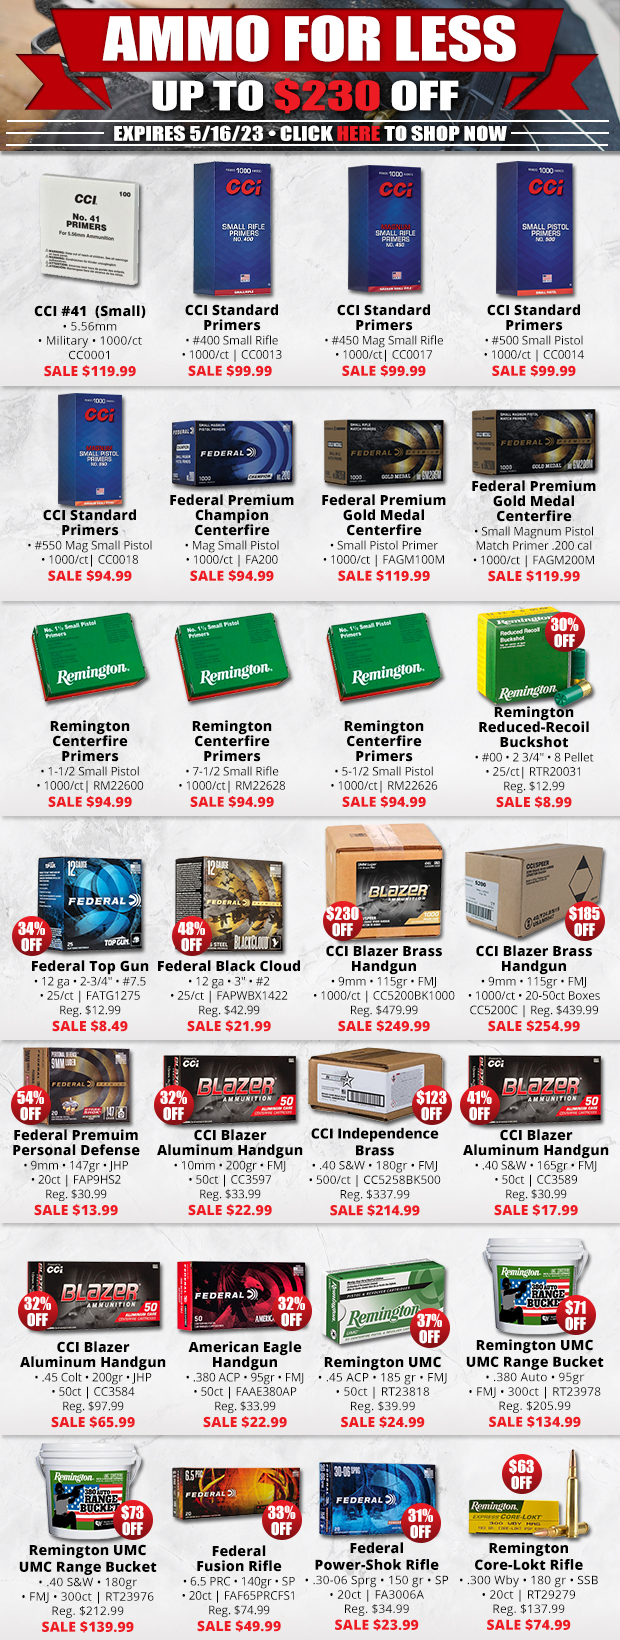 Ammo For Less  Up To $230 Off